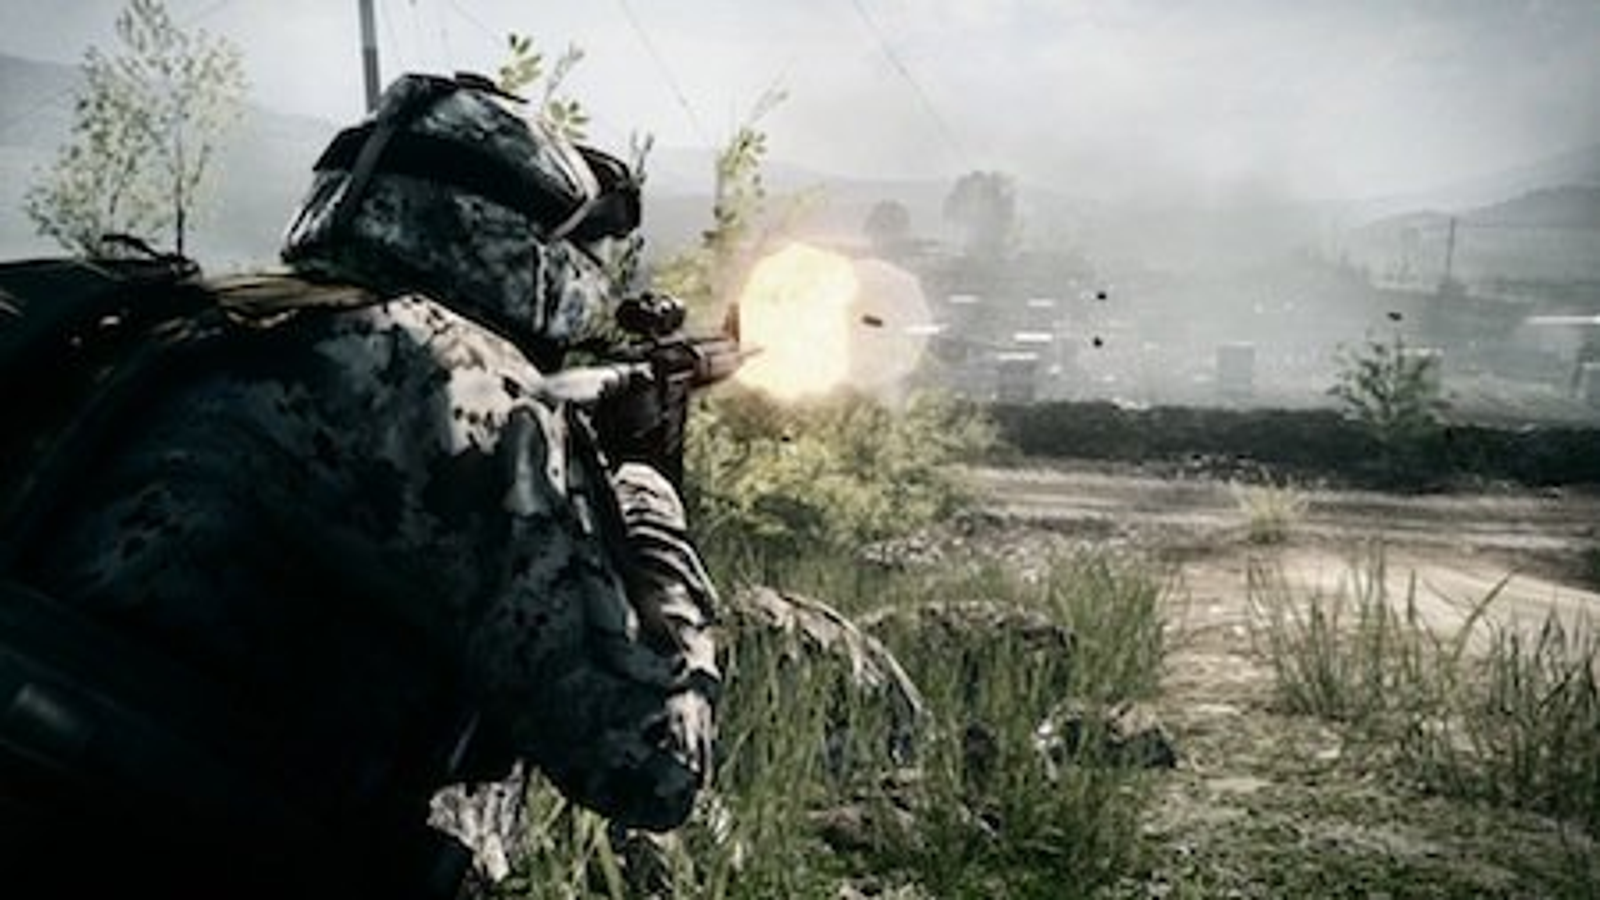 There is a battle royale mode for battlefield 3 : r/battlefield3